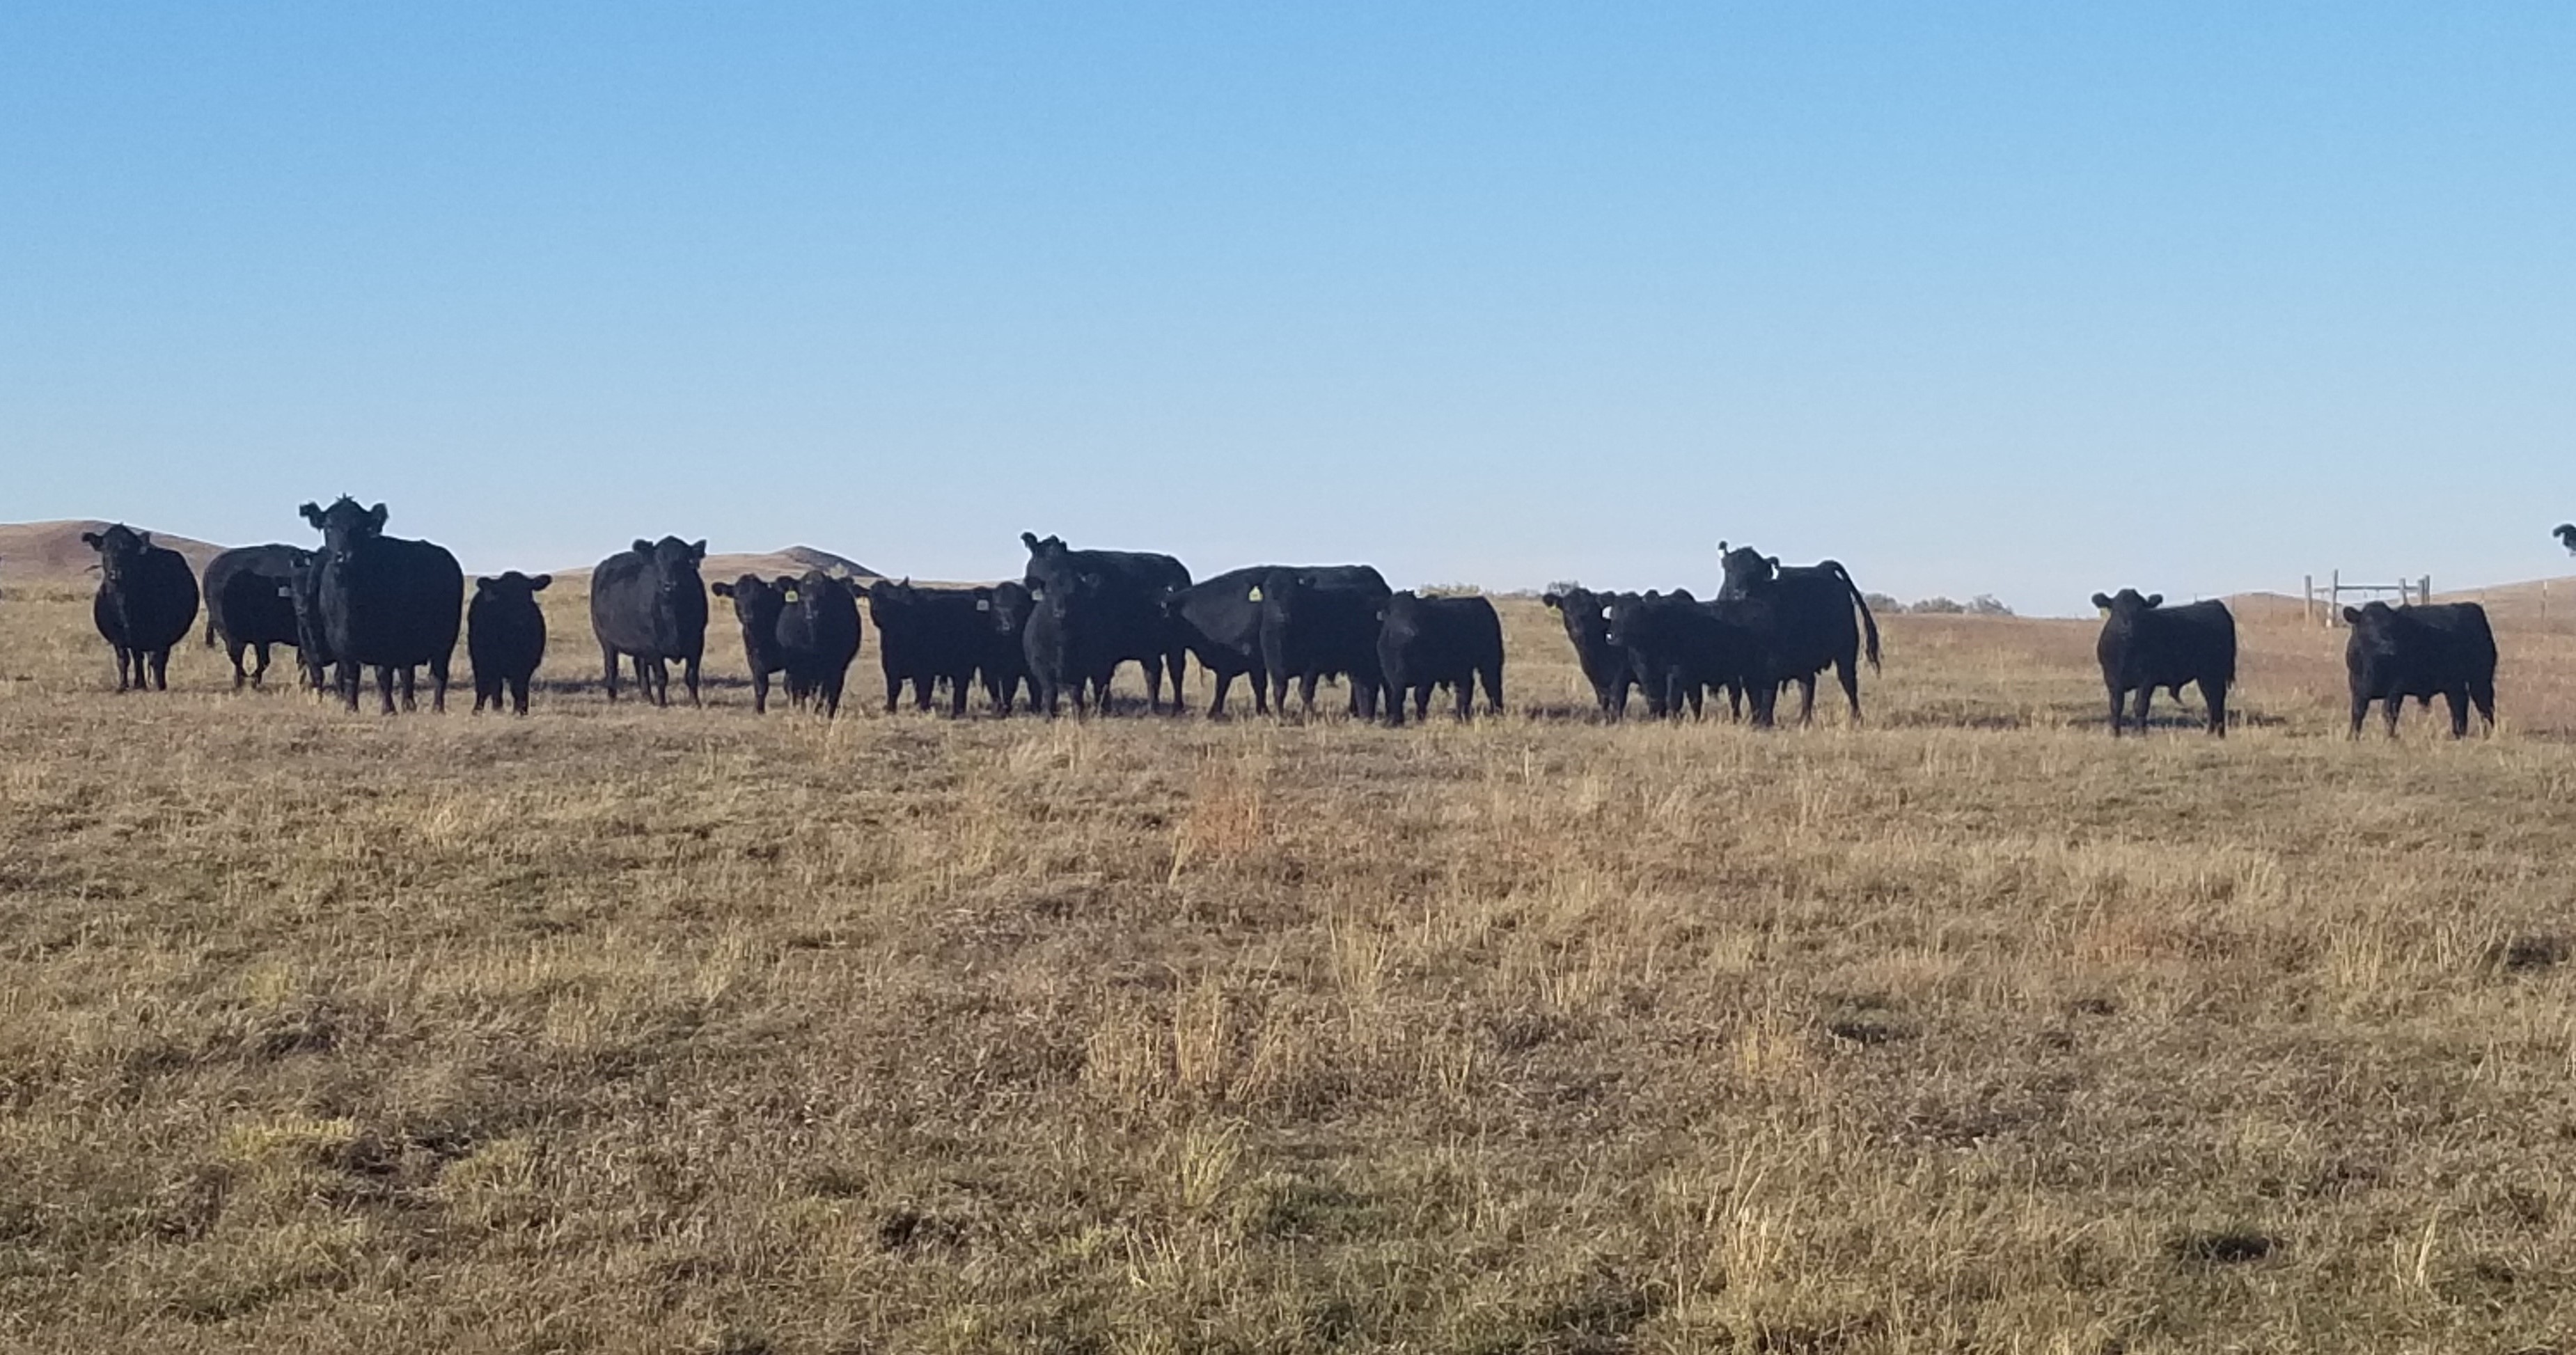 North Dakota livestock producers are facing forage quality and quantity issues because of the drought. (NDSU photo)